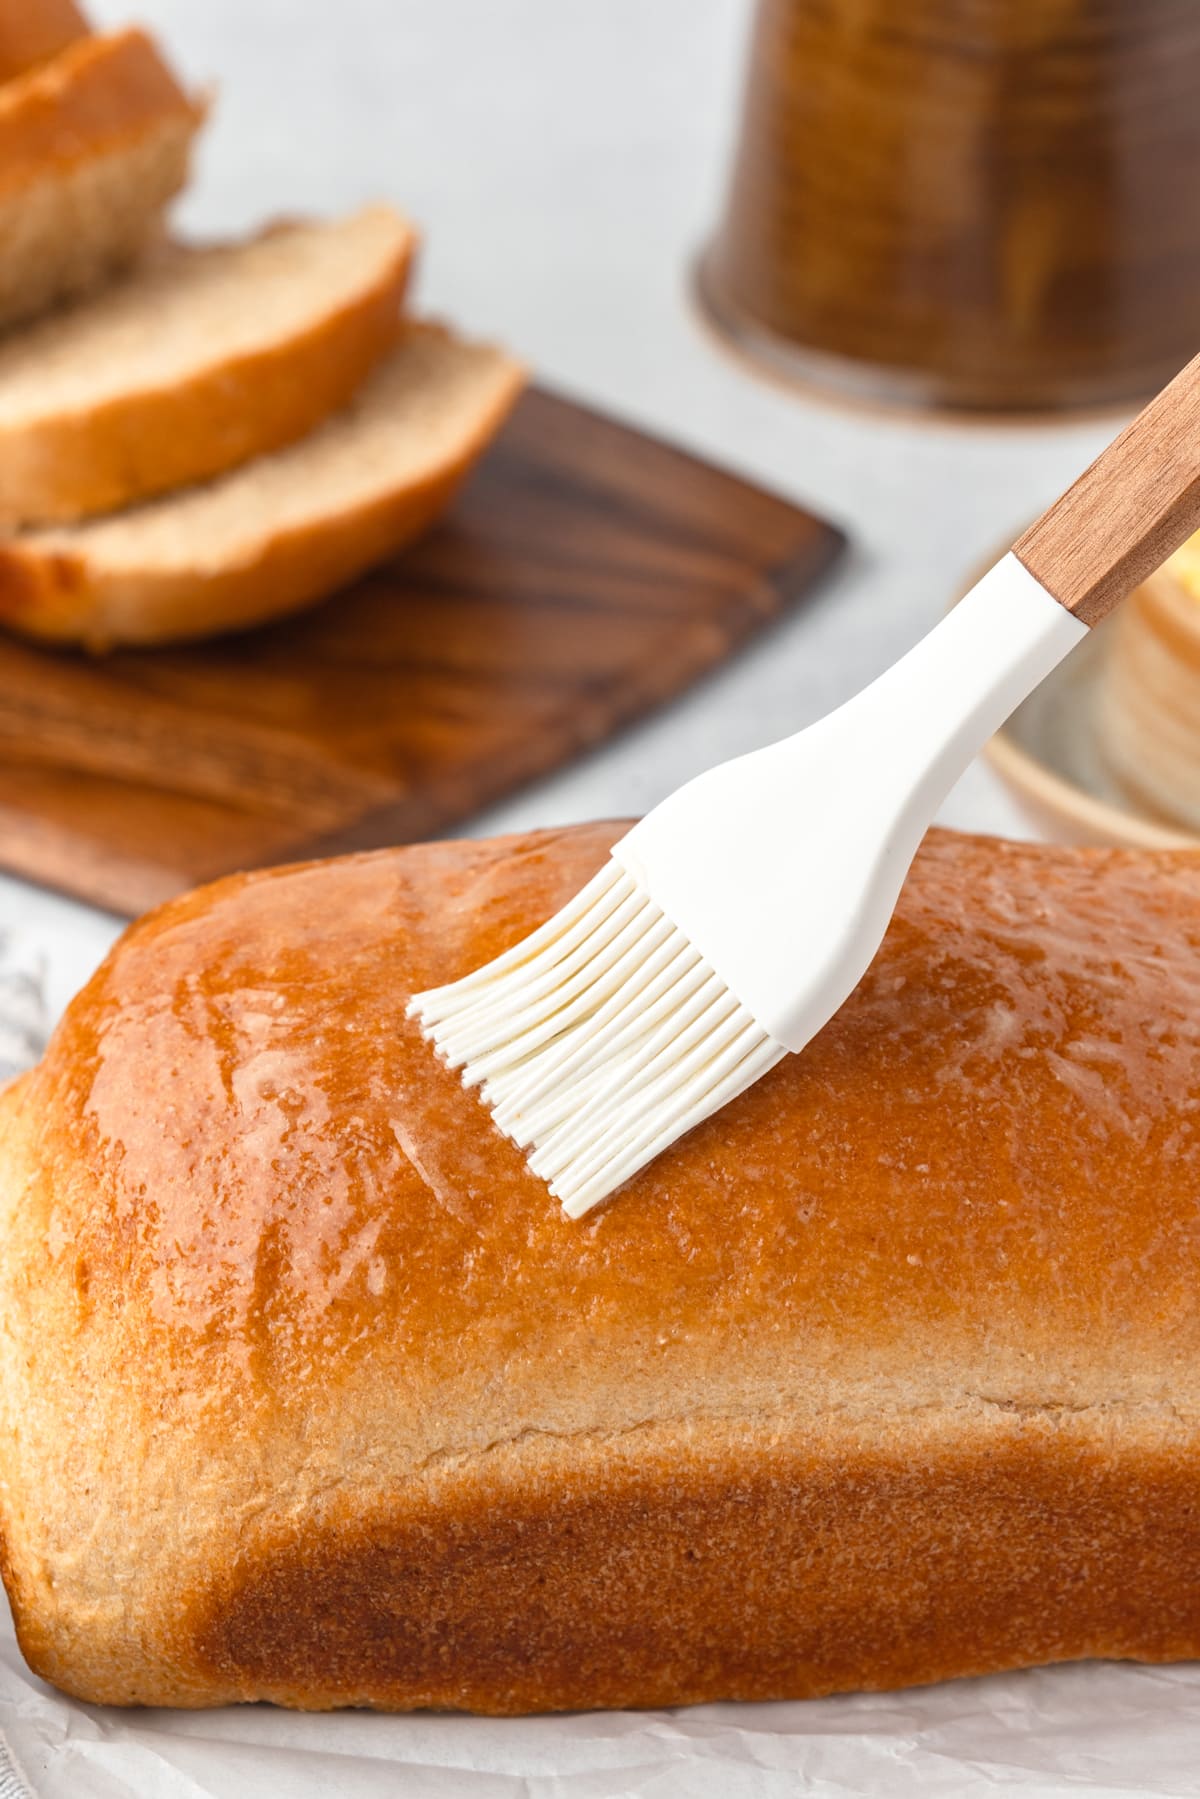 An uncut loaf of whole wheat bread getting brushed with melted butter with a white pastry brush.